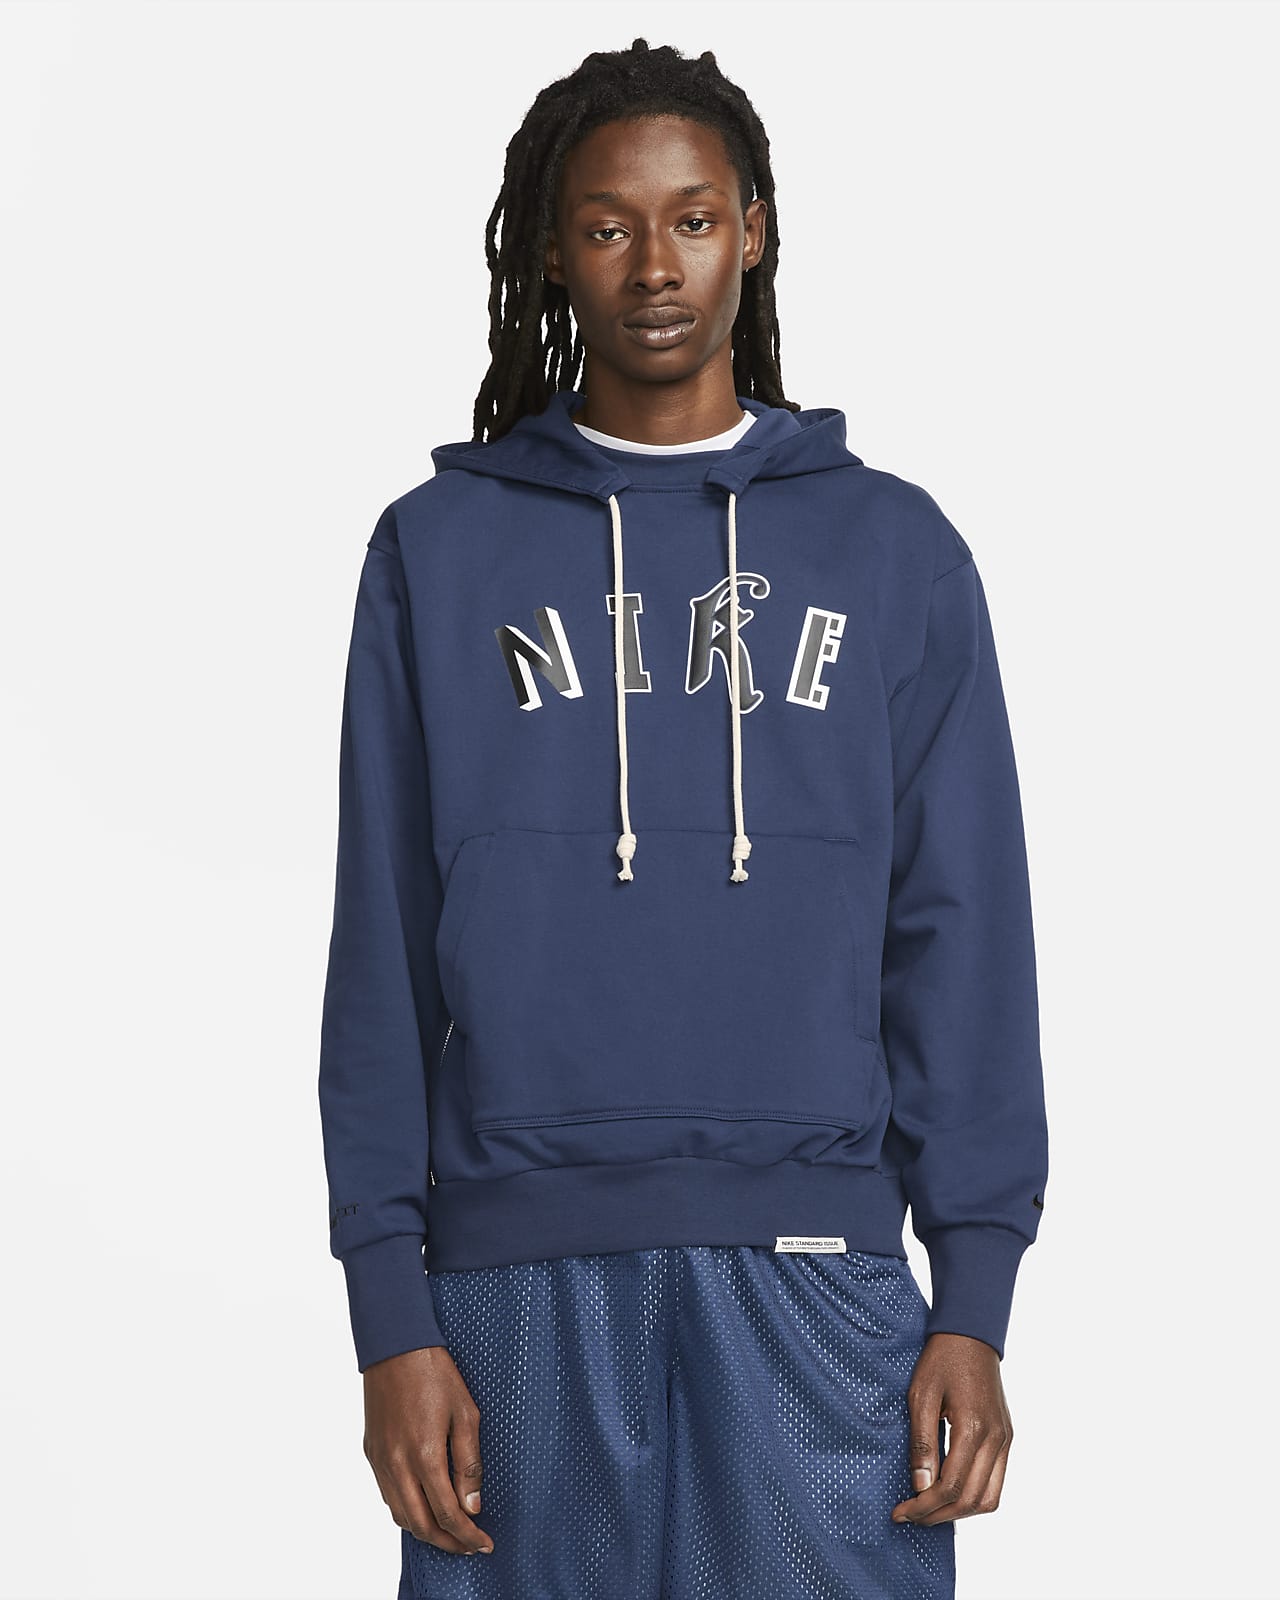 Nike Standard Issue Men's Basketball Pullover Hoodie (Imperial